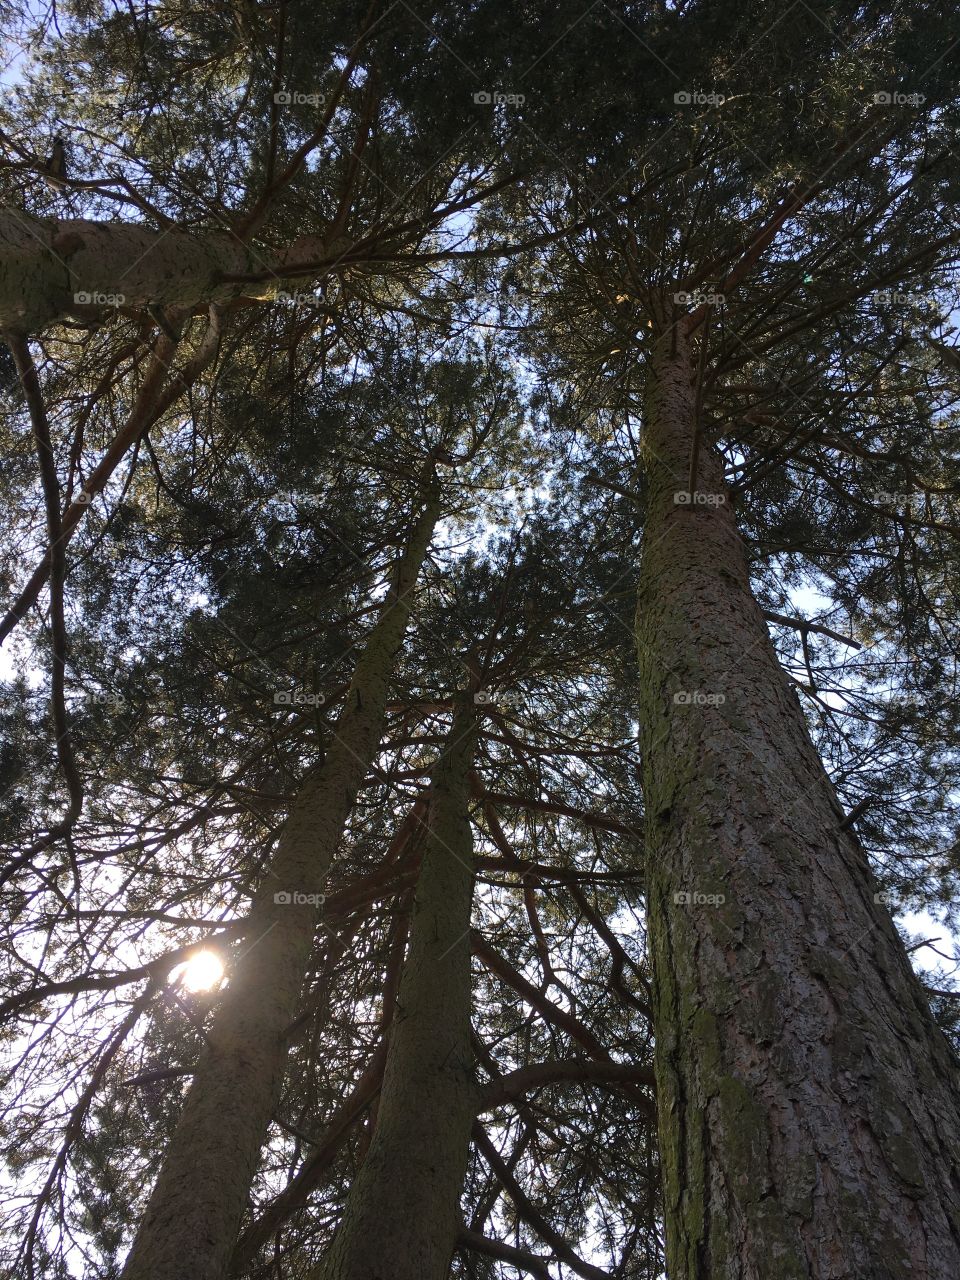 Pine tree woodland with the sun shining through the trees in summer looking upwards